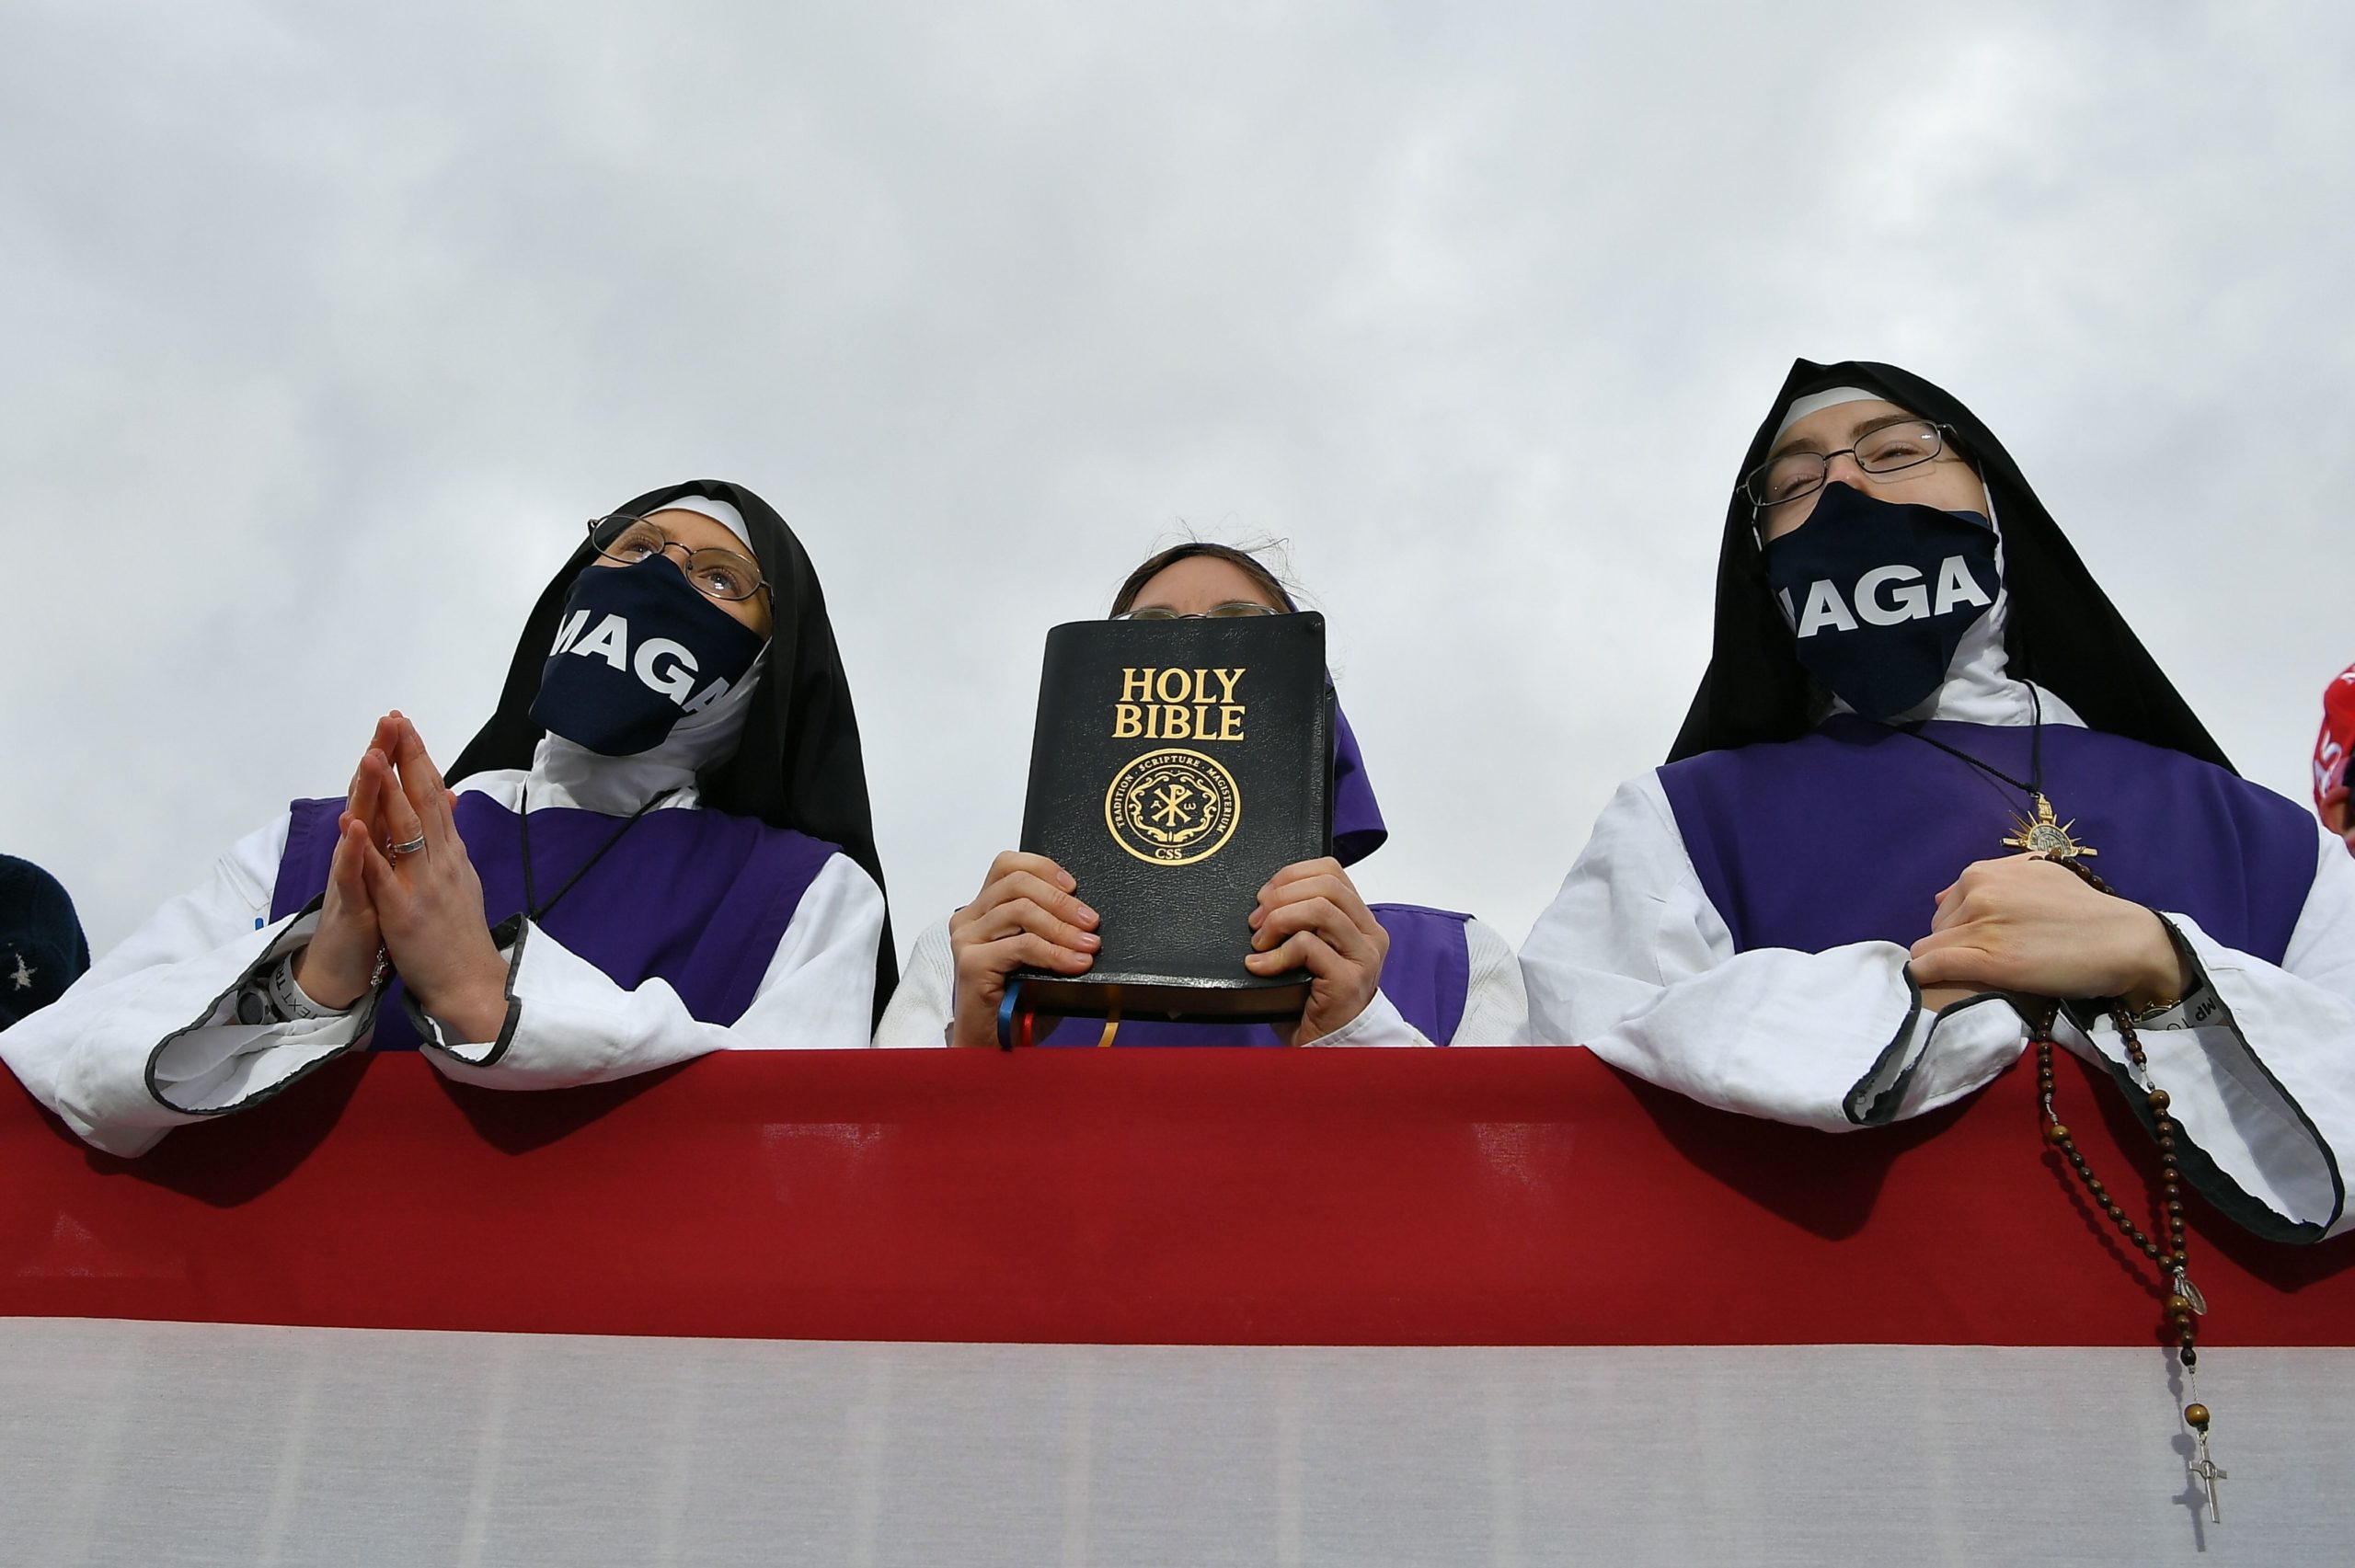 Nuns wearing masks displaying Trump's MAGA slogan listen as US President Donald Trump speaks during a campaign rally at Pickaway Agriculture and Event Center in Circleville, Ohio on October 24, 2020. (MANDEL NGAN/AFP via Getty Images)